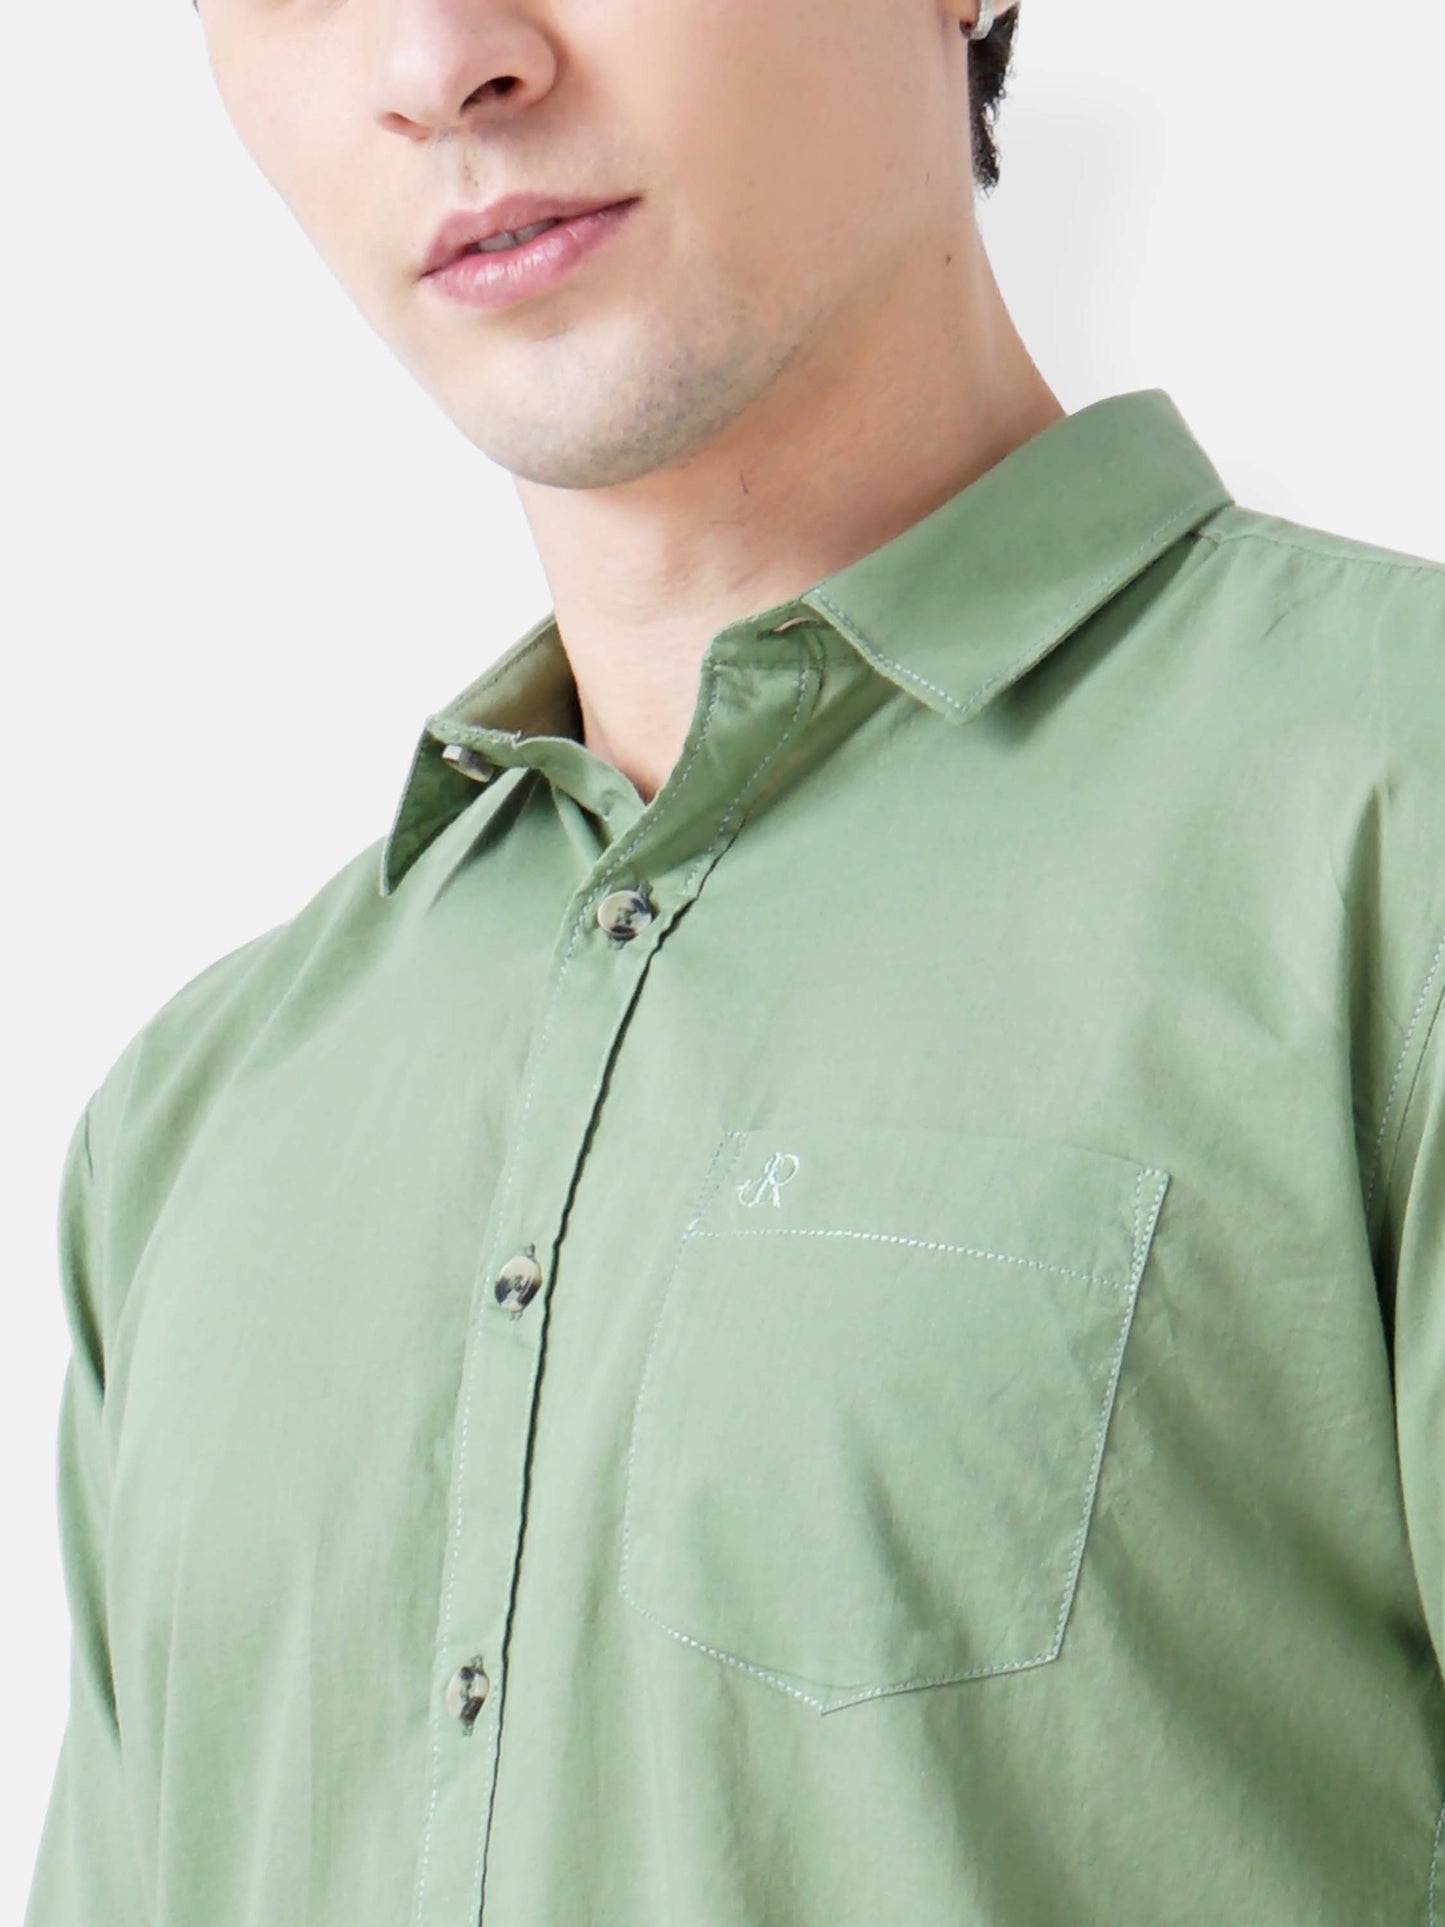 Oxley Solid Shirt